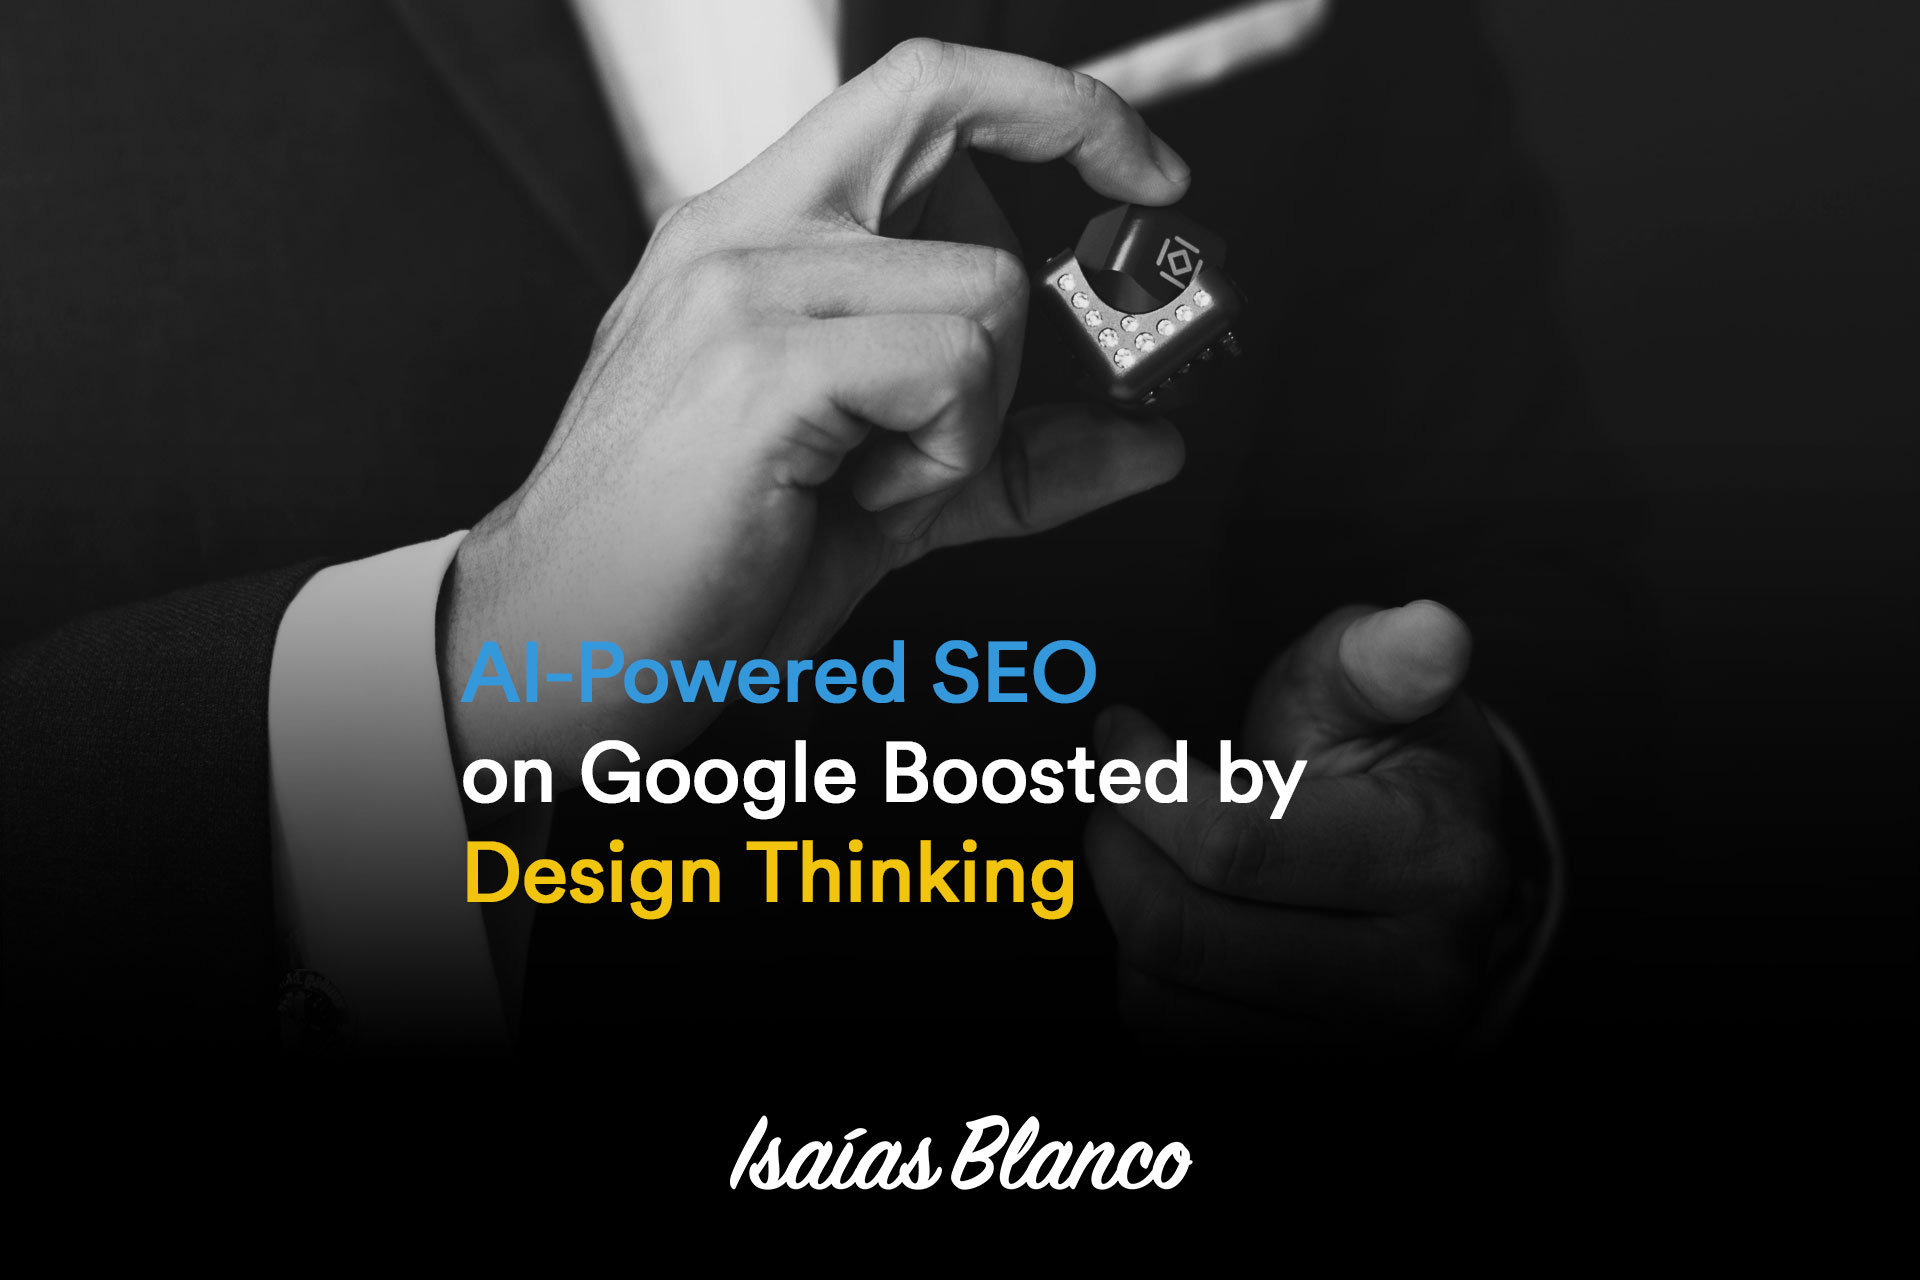 AI-Powered SEO on Google Boosted by Design Thinking